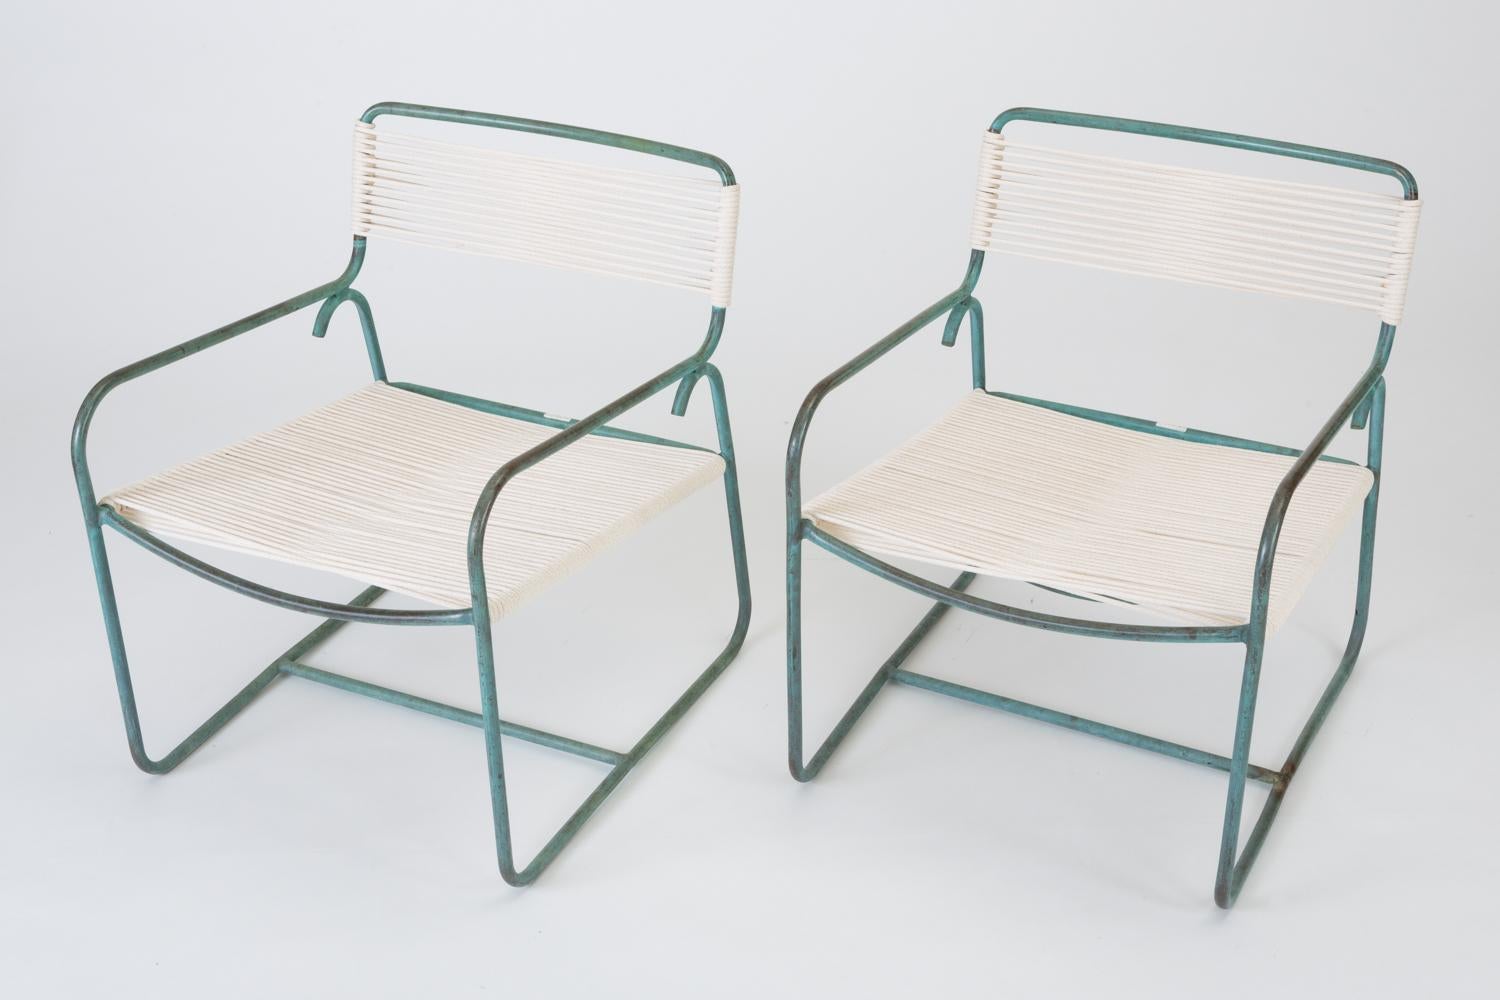 A wide patio lounge chair by Walter Lamb for Brown Jordan. The chair has a simple construction in tubular bronze with a patinated finish, with rounded squares serving as runners on each side. The backrest, and seat are both woven in cotton sail